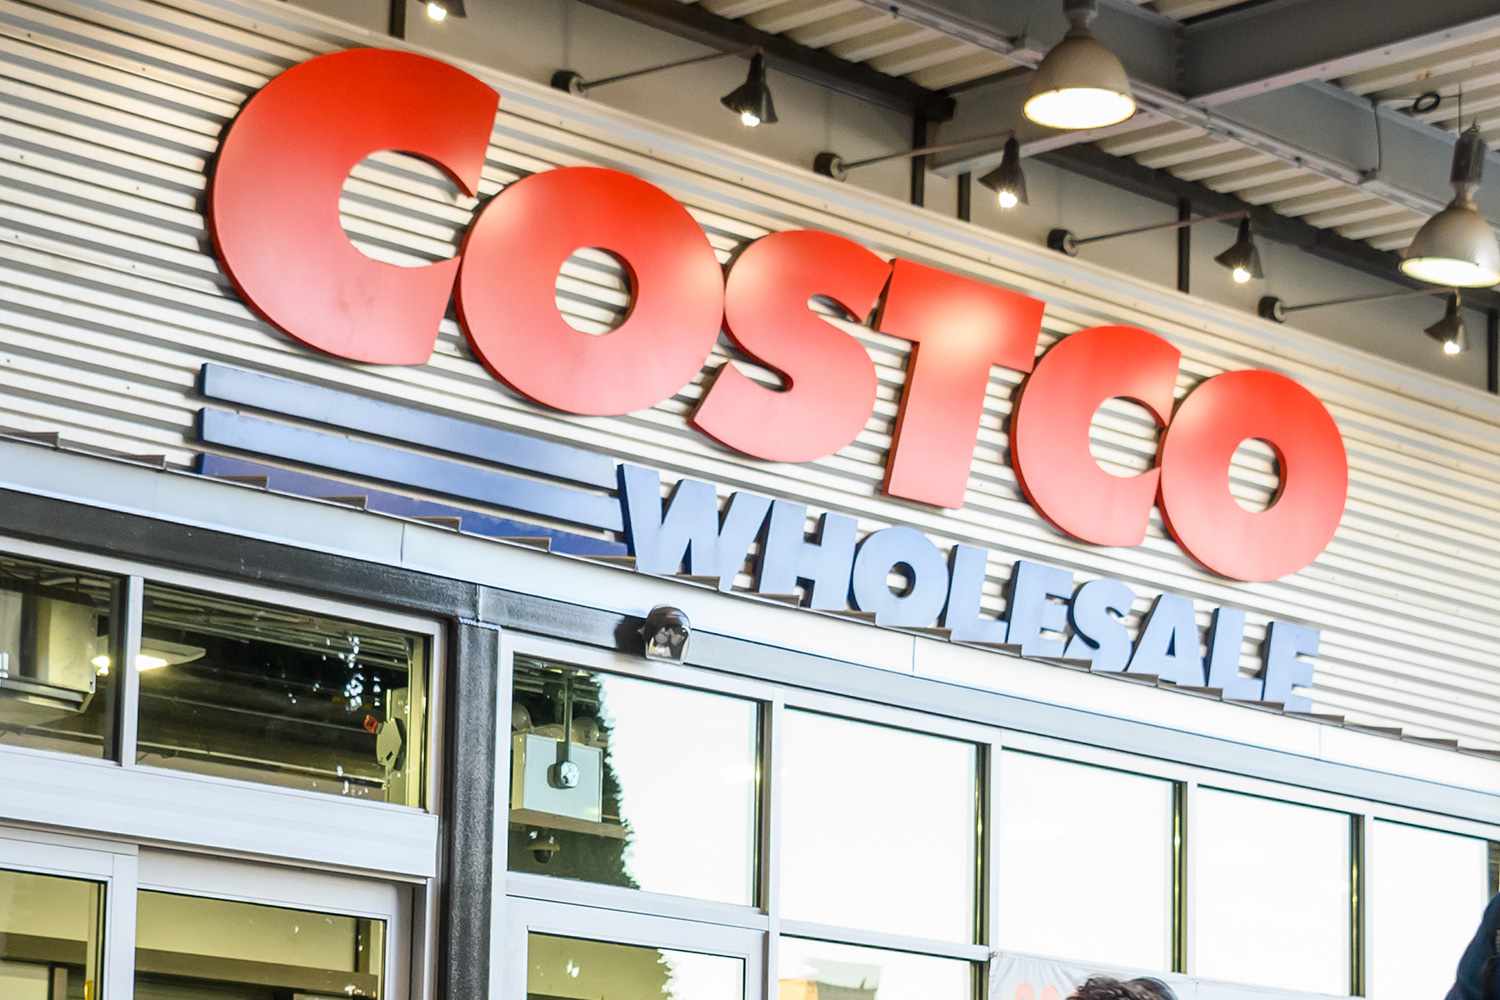 Costco Wholesale in East Harlem on November 24, 2020 在纽约市